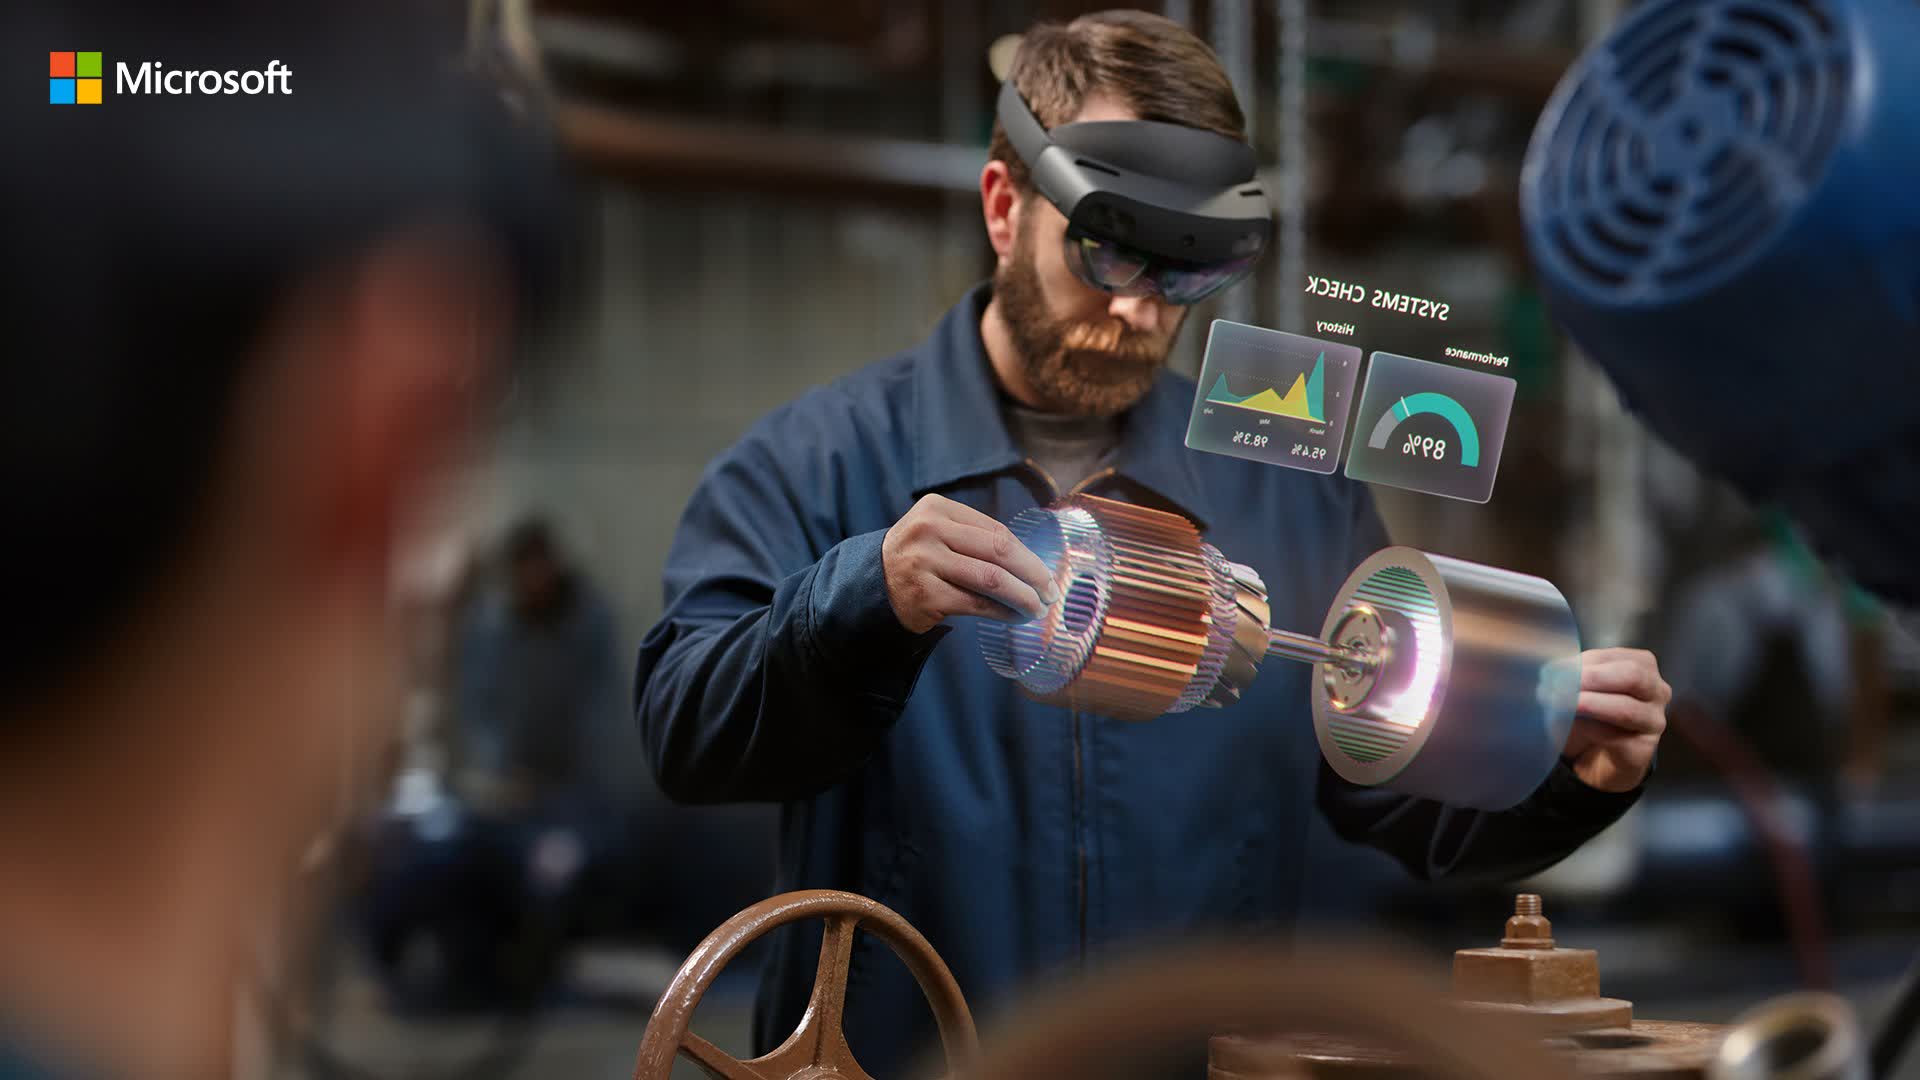 Microsoft metaverse strategy is apparently in disarray, HoloLens future looking bleak